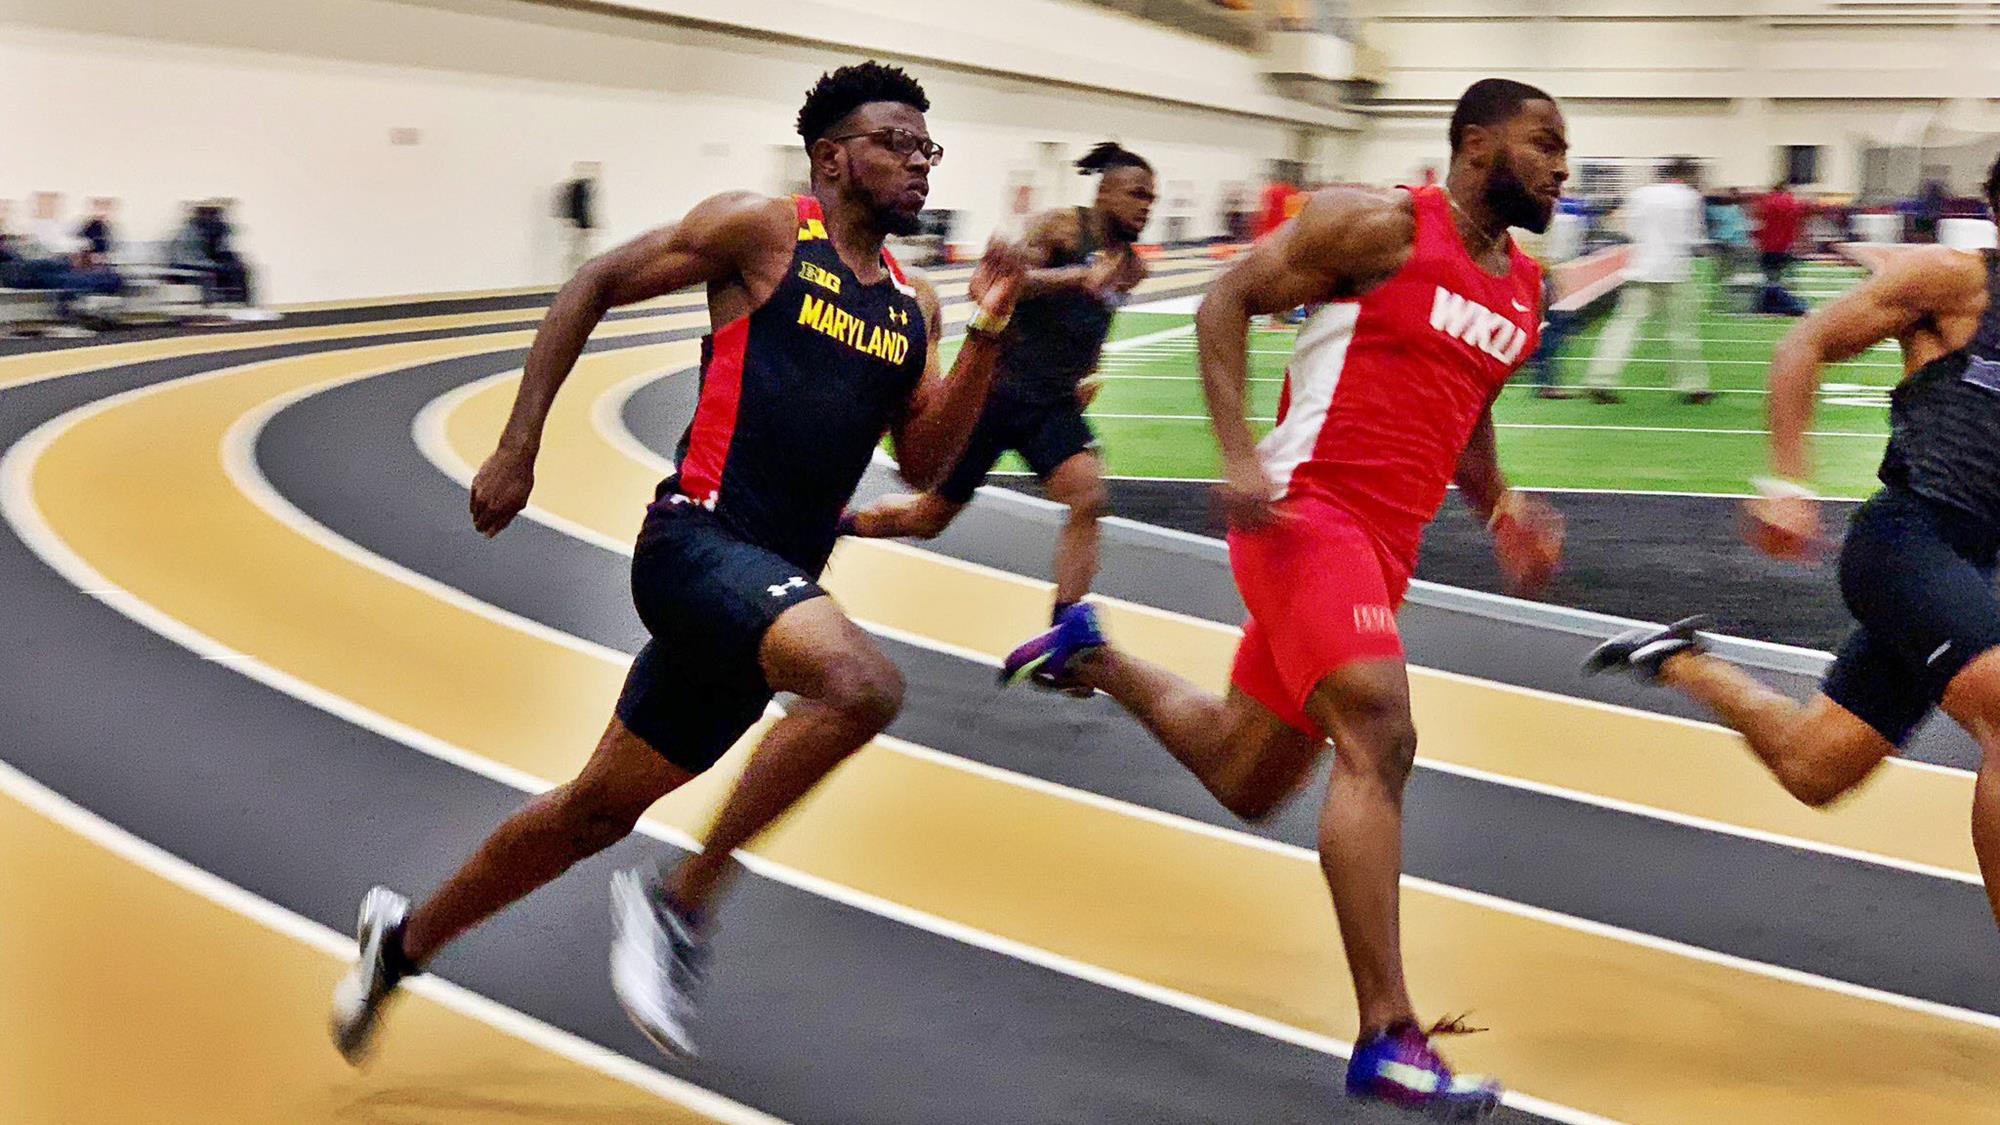 Deshawn Morris wins 400m, finishes 4th in 200m at US indoor meet